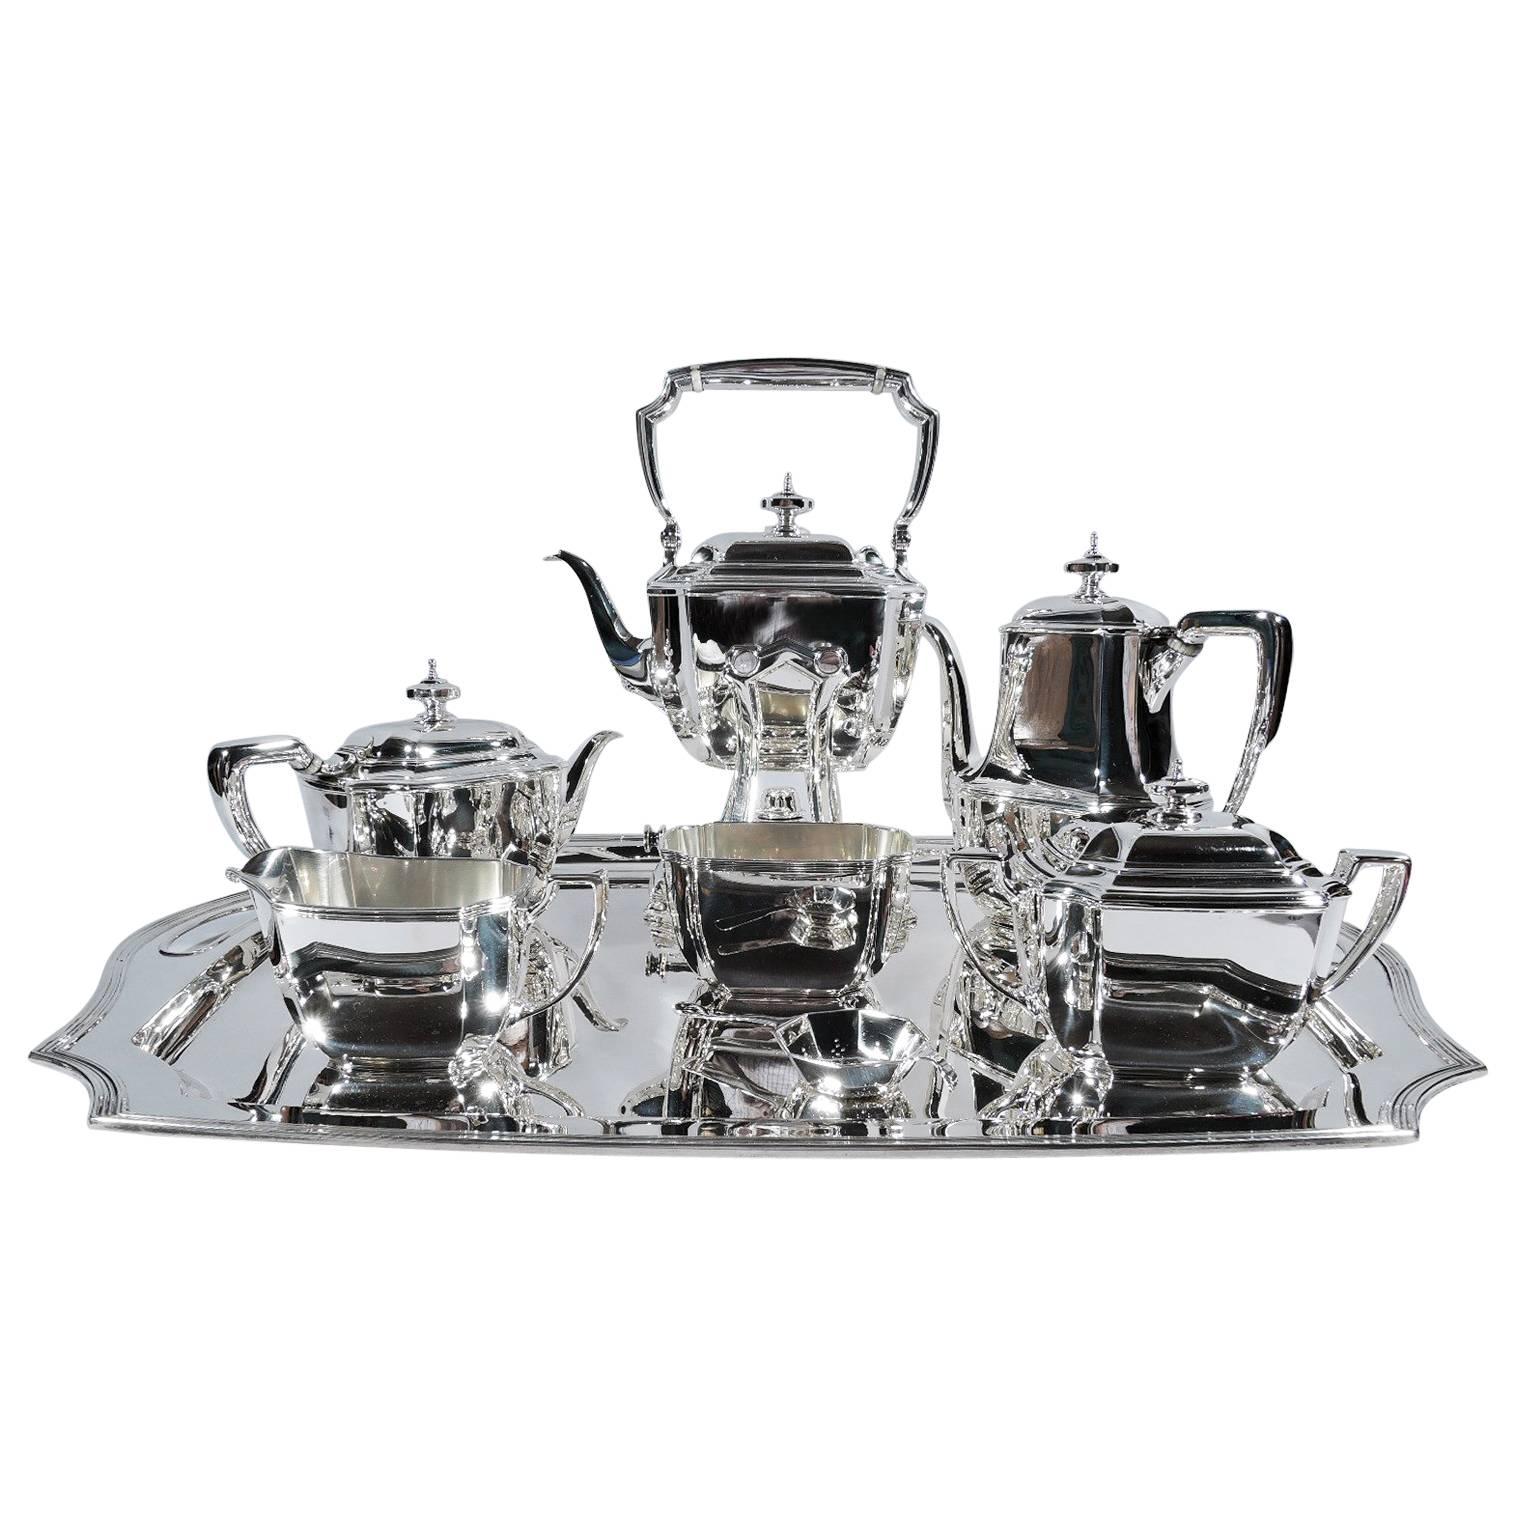 Desirable Tiffany Hampton Sterling Silver Tea and Coffee Set on Tray